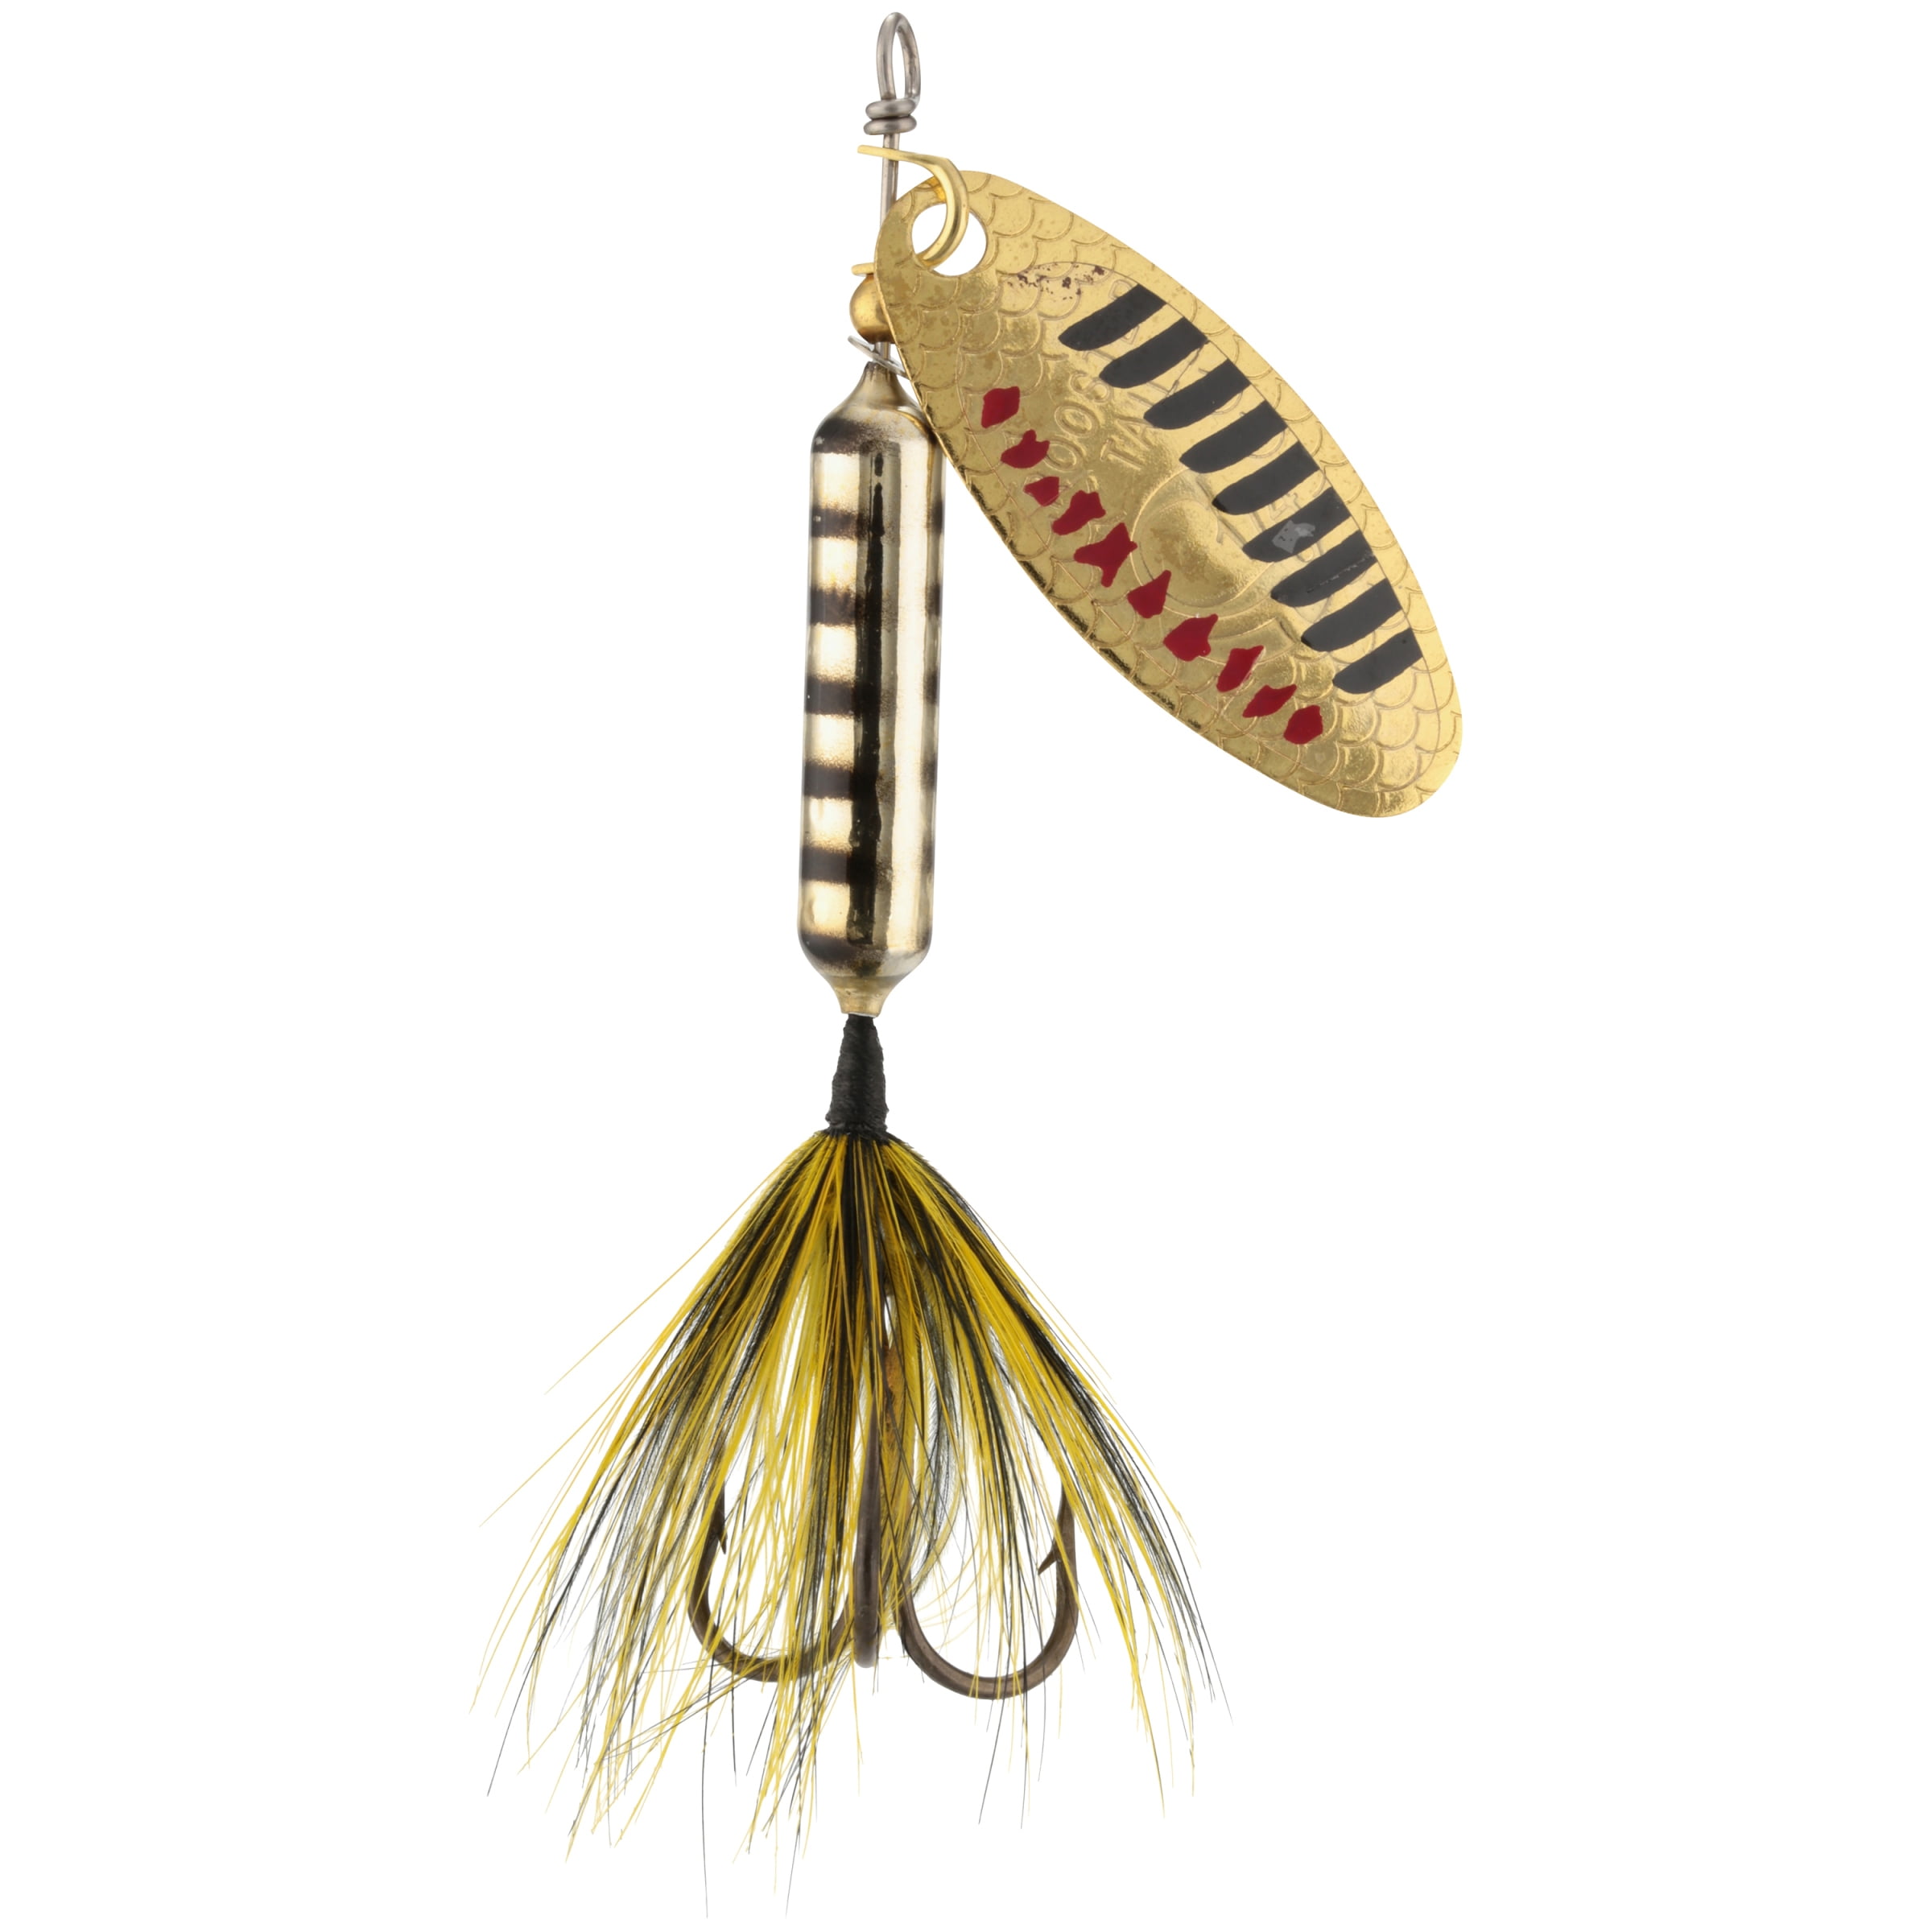 Worden's® Rooster Tail® Original, Inline Spinnerbait Fishing Lure